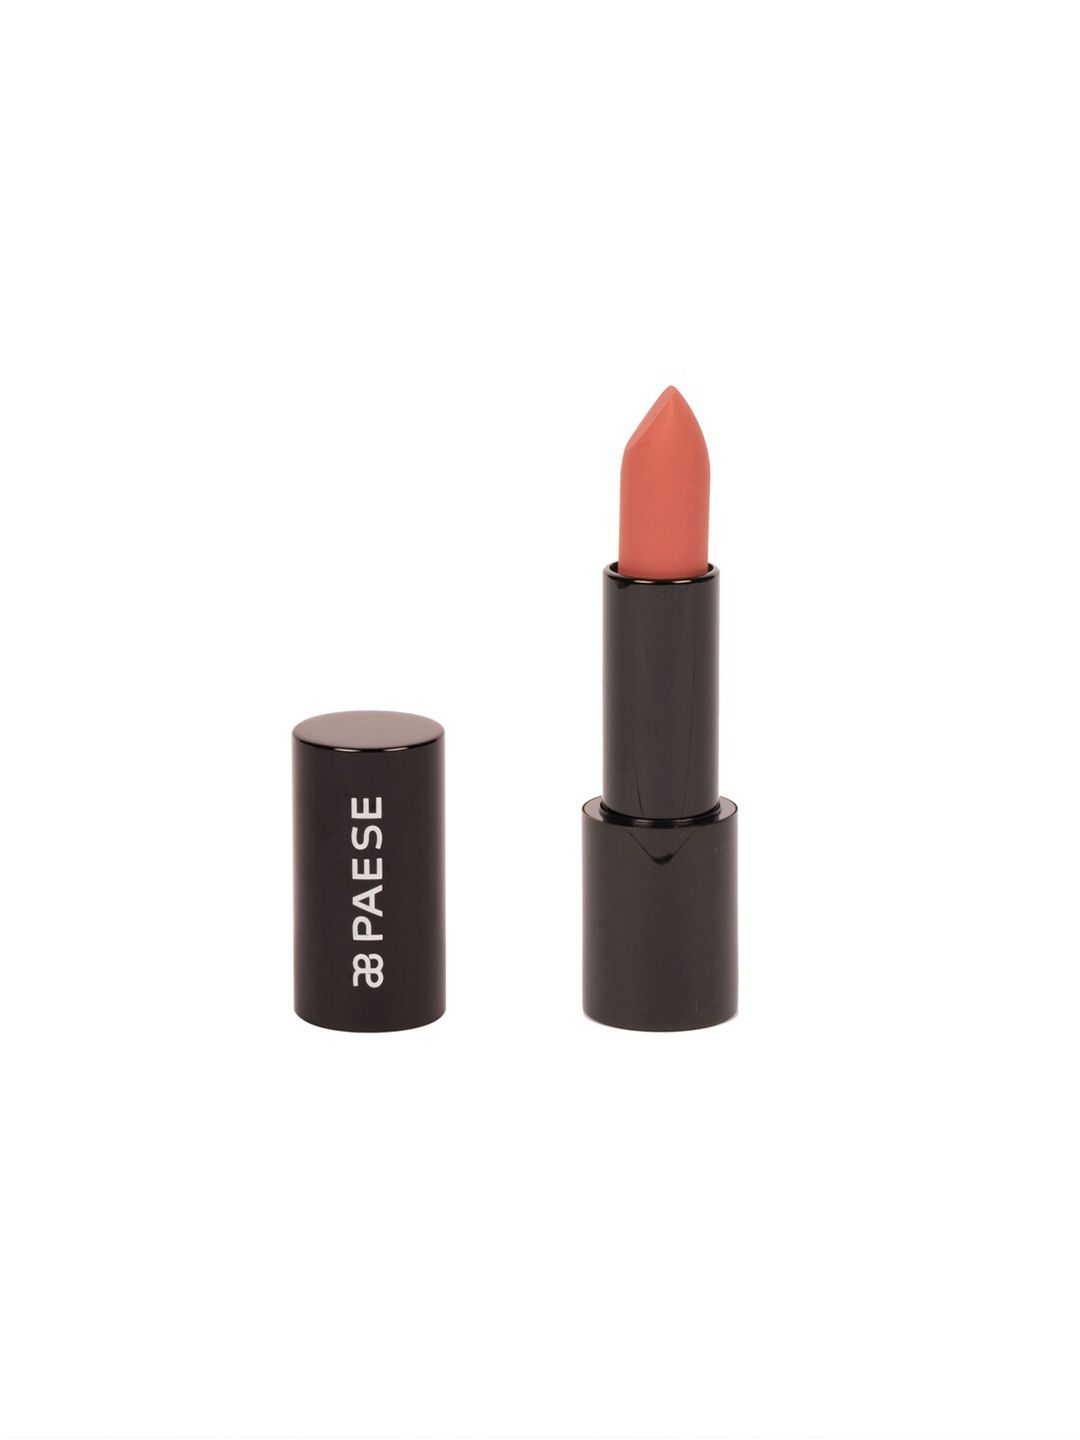 Paese Cosmetics Mattologie Matte Lipstick with Rice Oil 4.3 g - Peachy Nude 105 Price in India